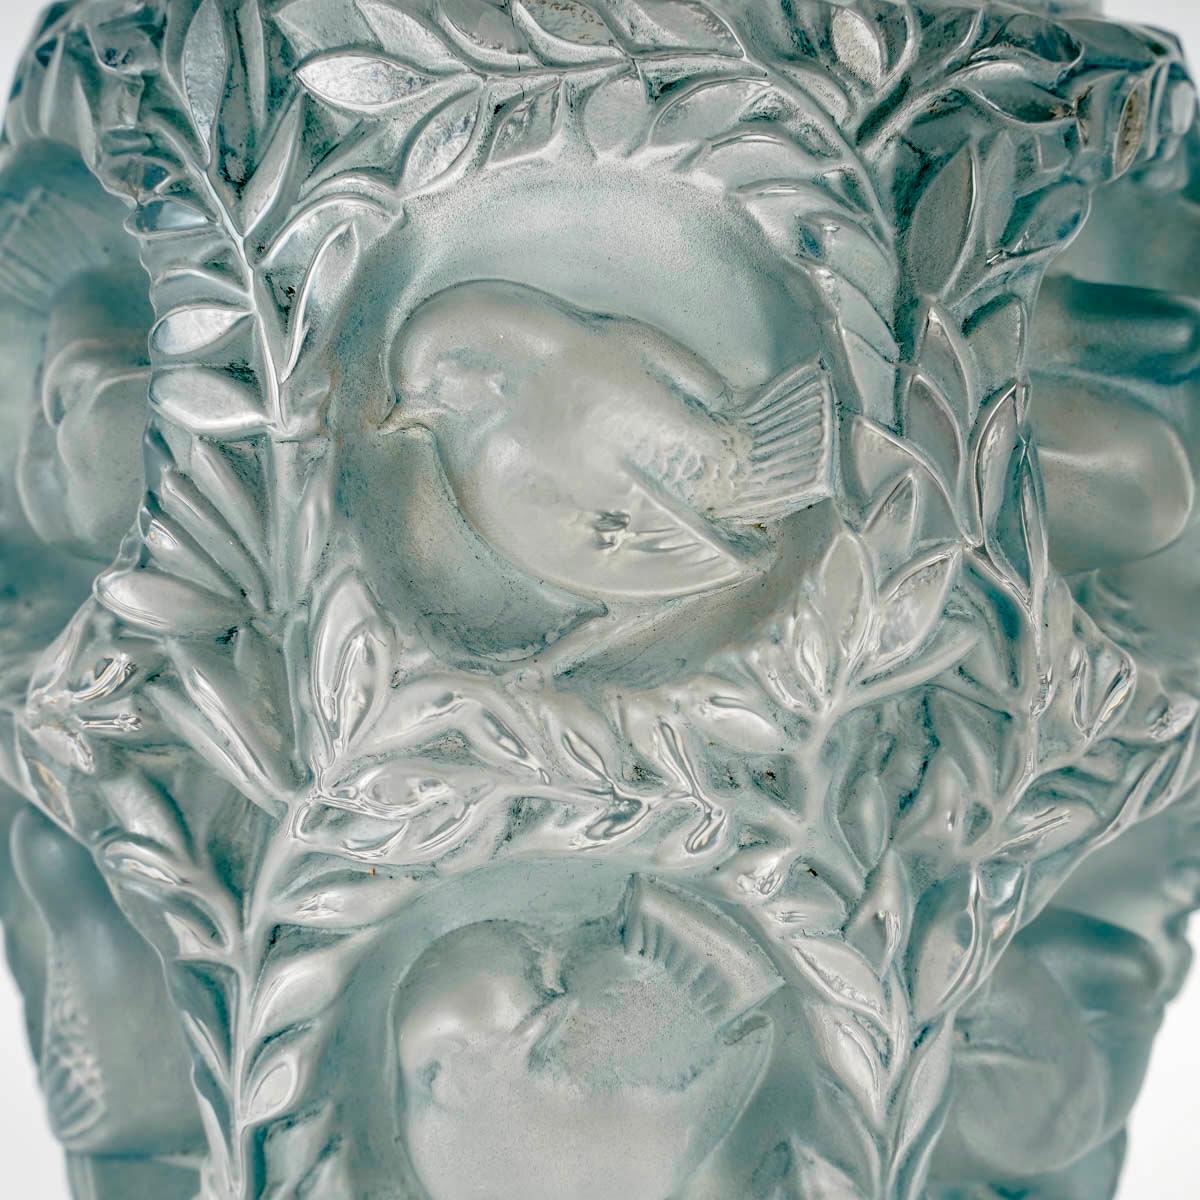 French 1939 Rene Lalique - Vase Bagatelle Frosted Glass with Blue Patina